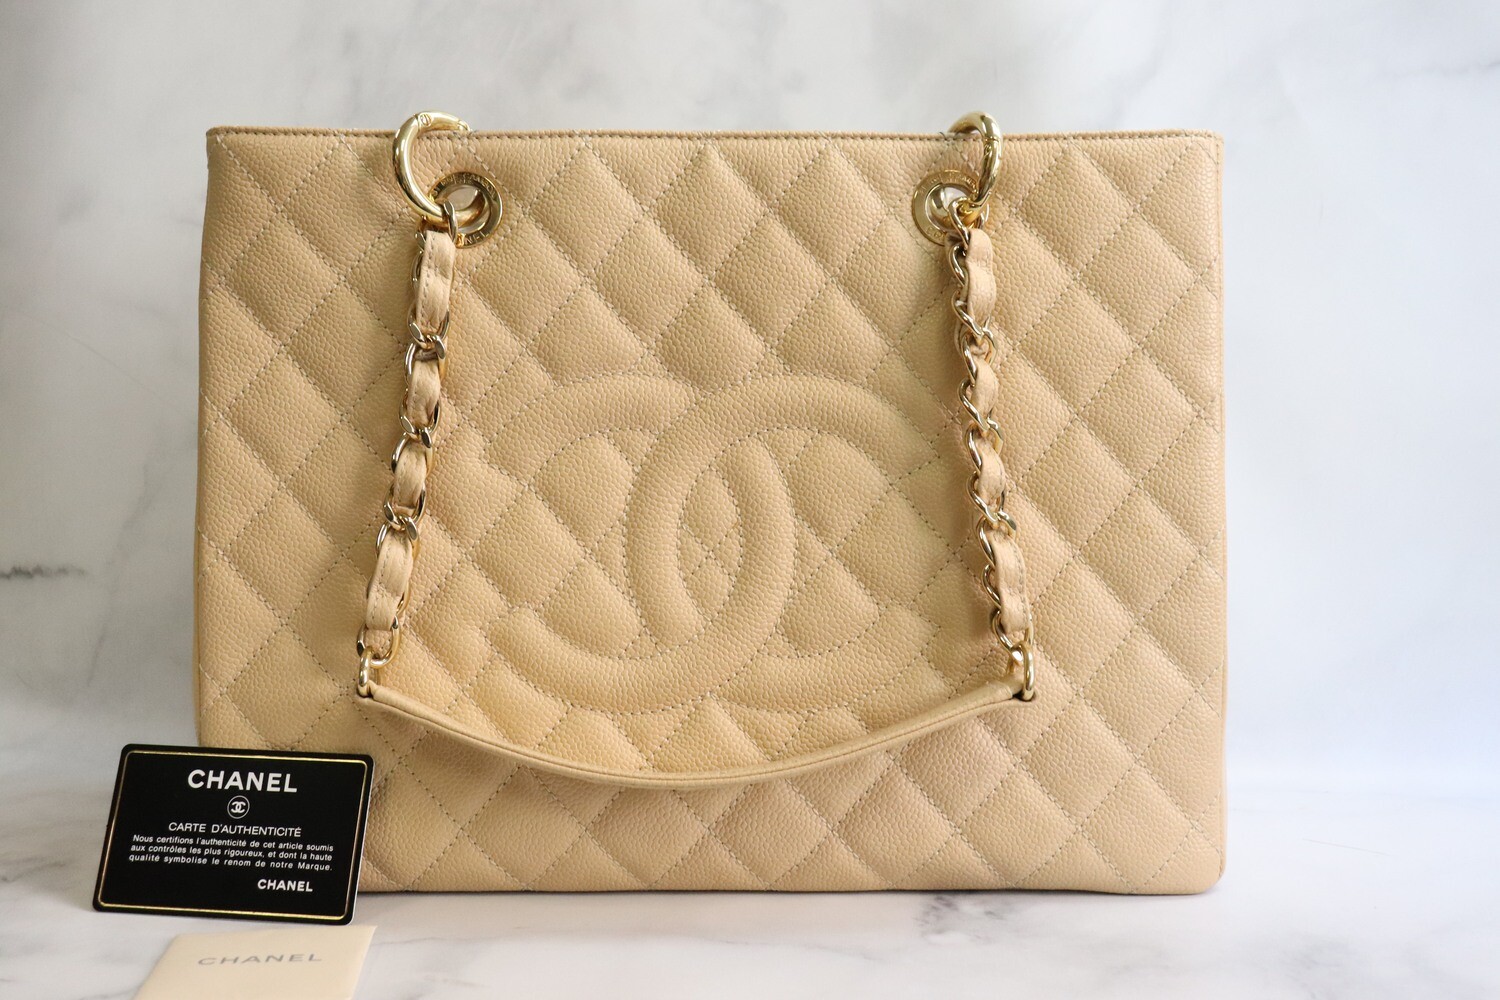 Chanel Grand Shopping Tote, Beige Clair Caviar Leather, Gold Hardware, Preowned in Dustbag